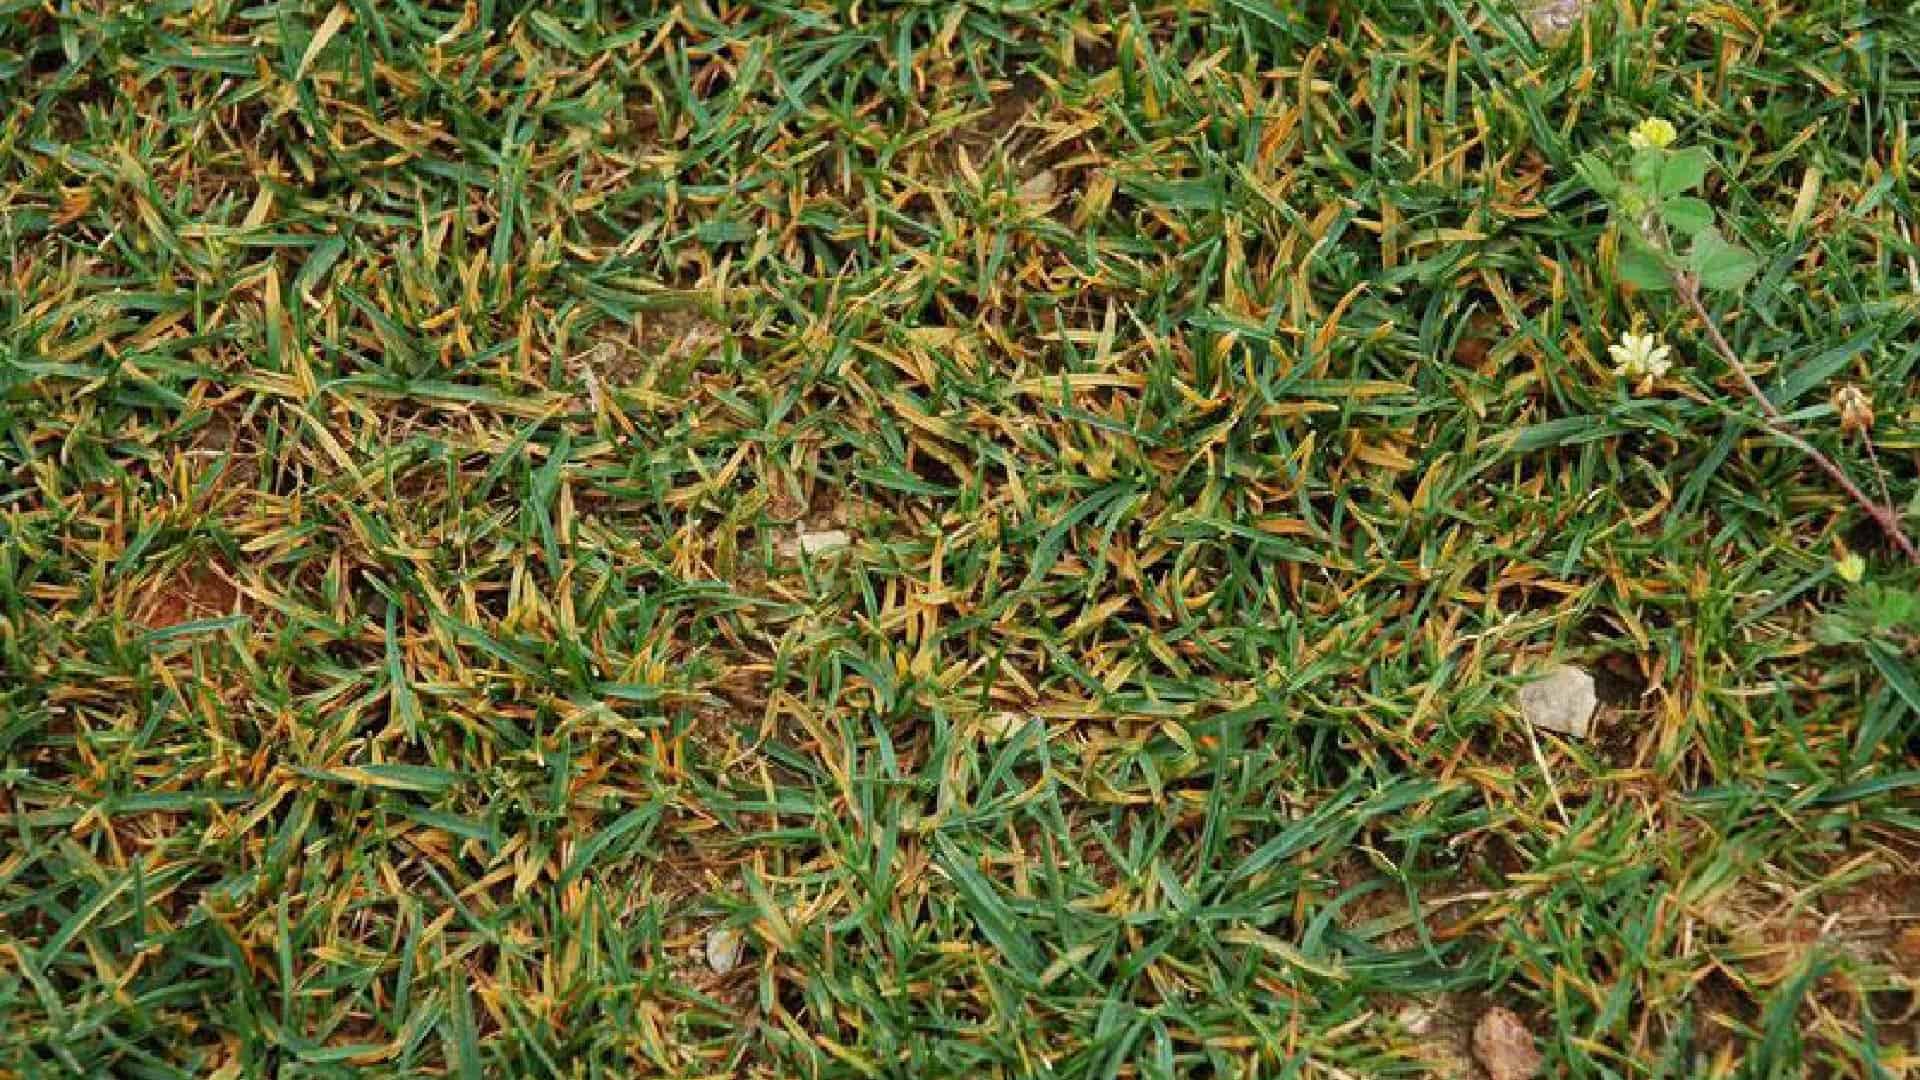 Lawn Fungus Identification Guide Which Common Fungal Disease Is In